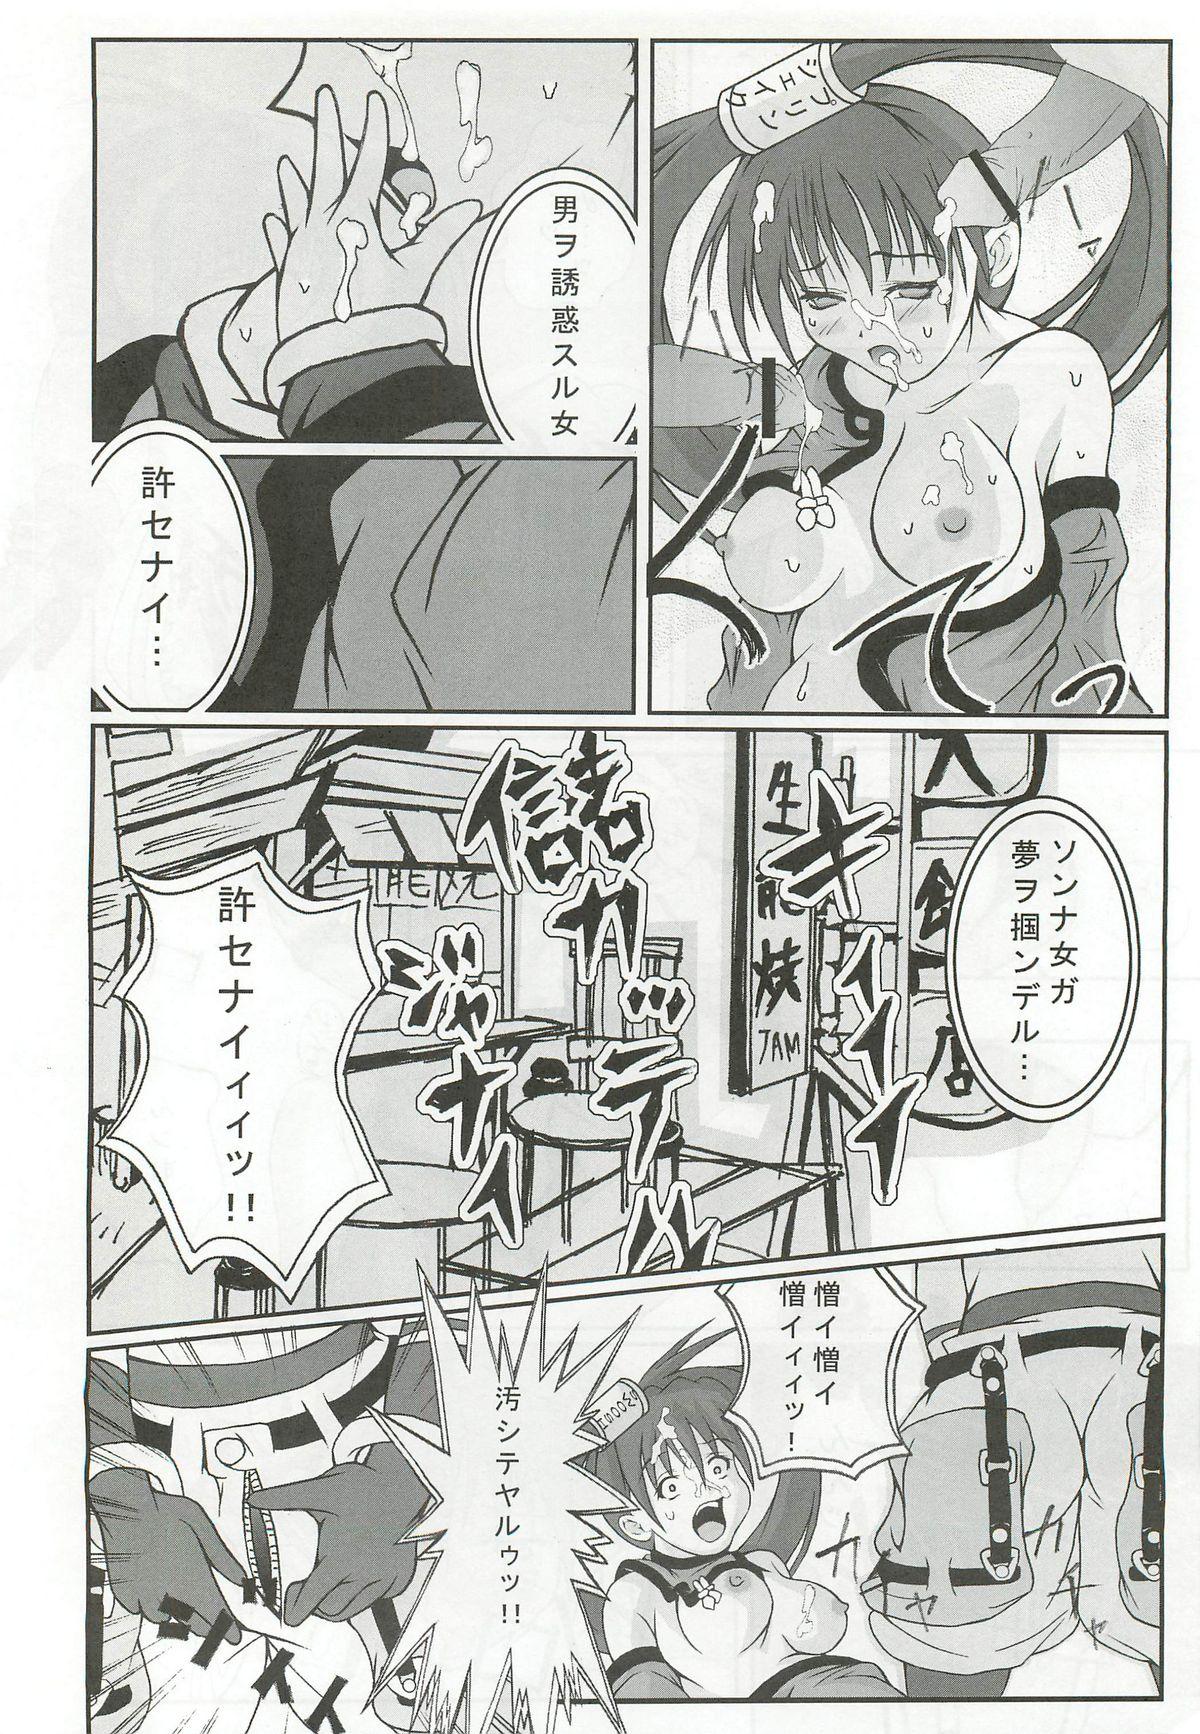 Tanned Passionless 2 - Guilty gear Club - Page 7